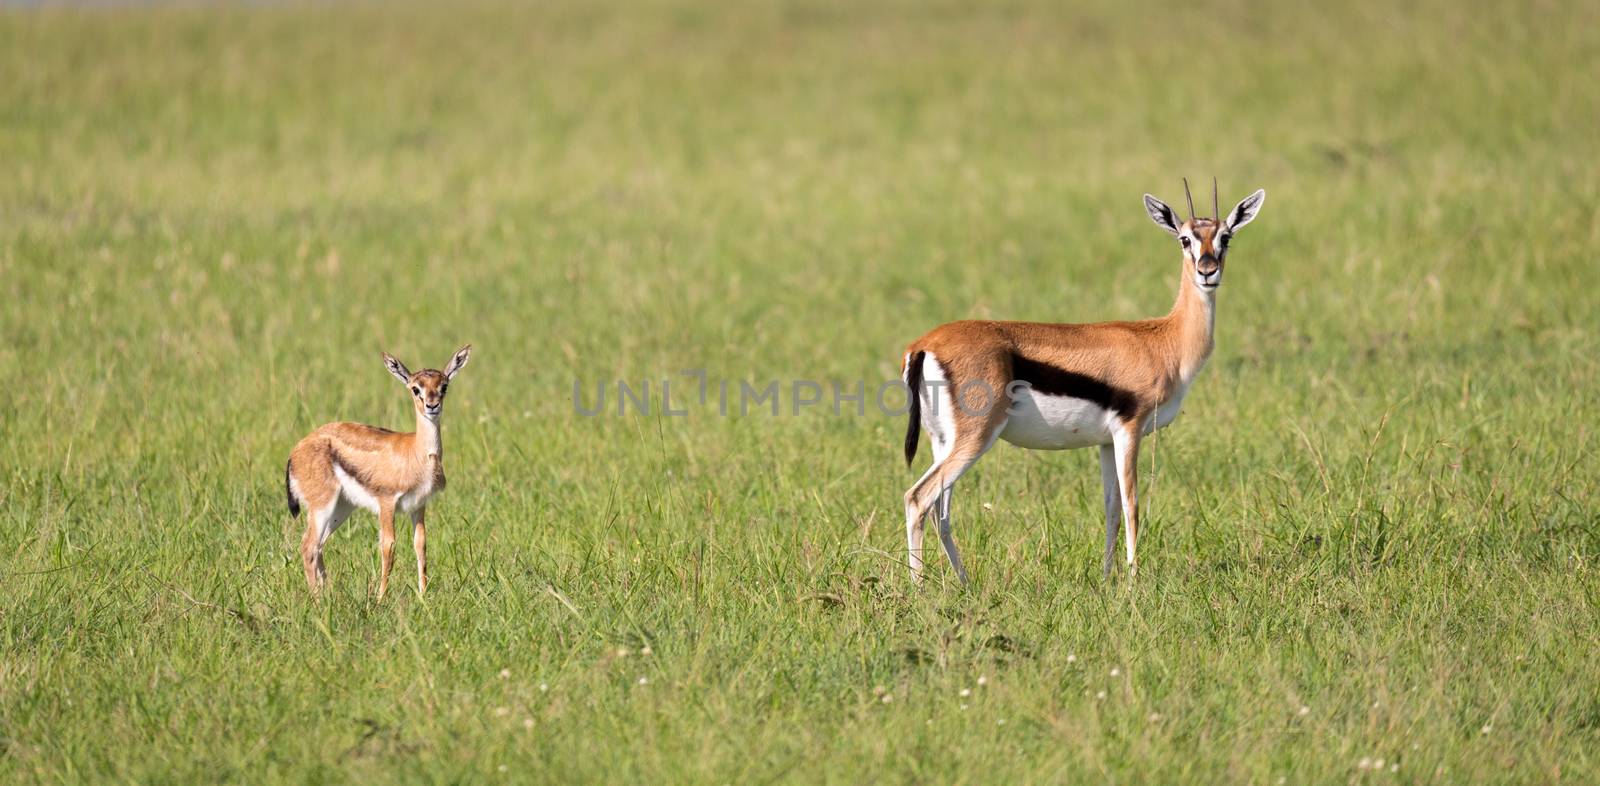 A family of Thomson gazelles in the savannah of Kenya by 25ehaag6